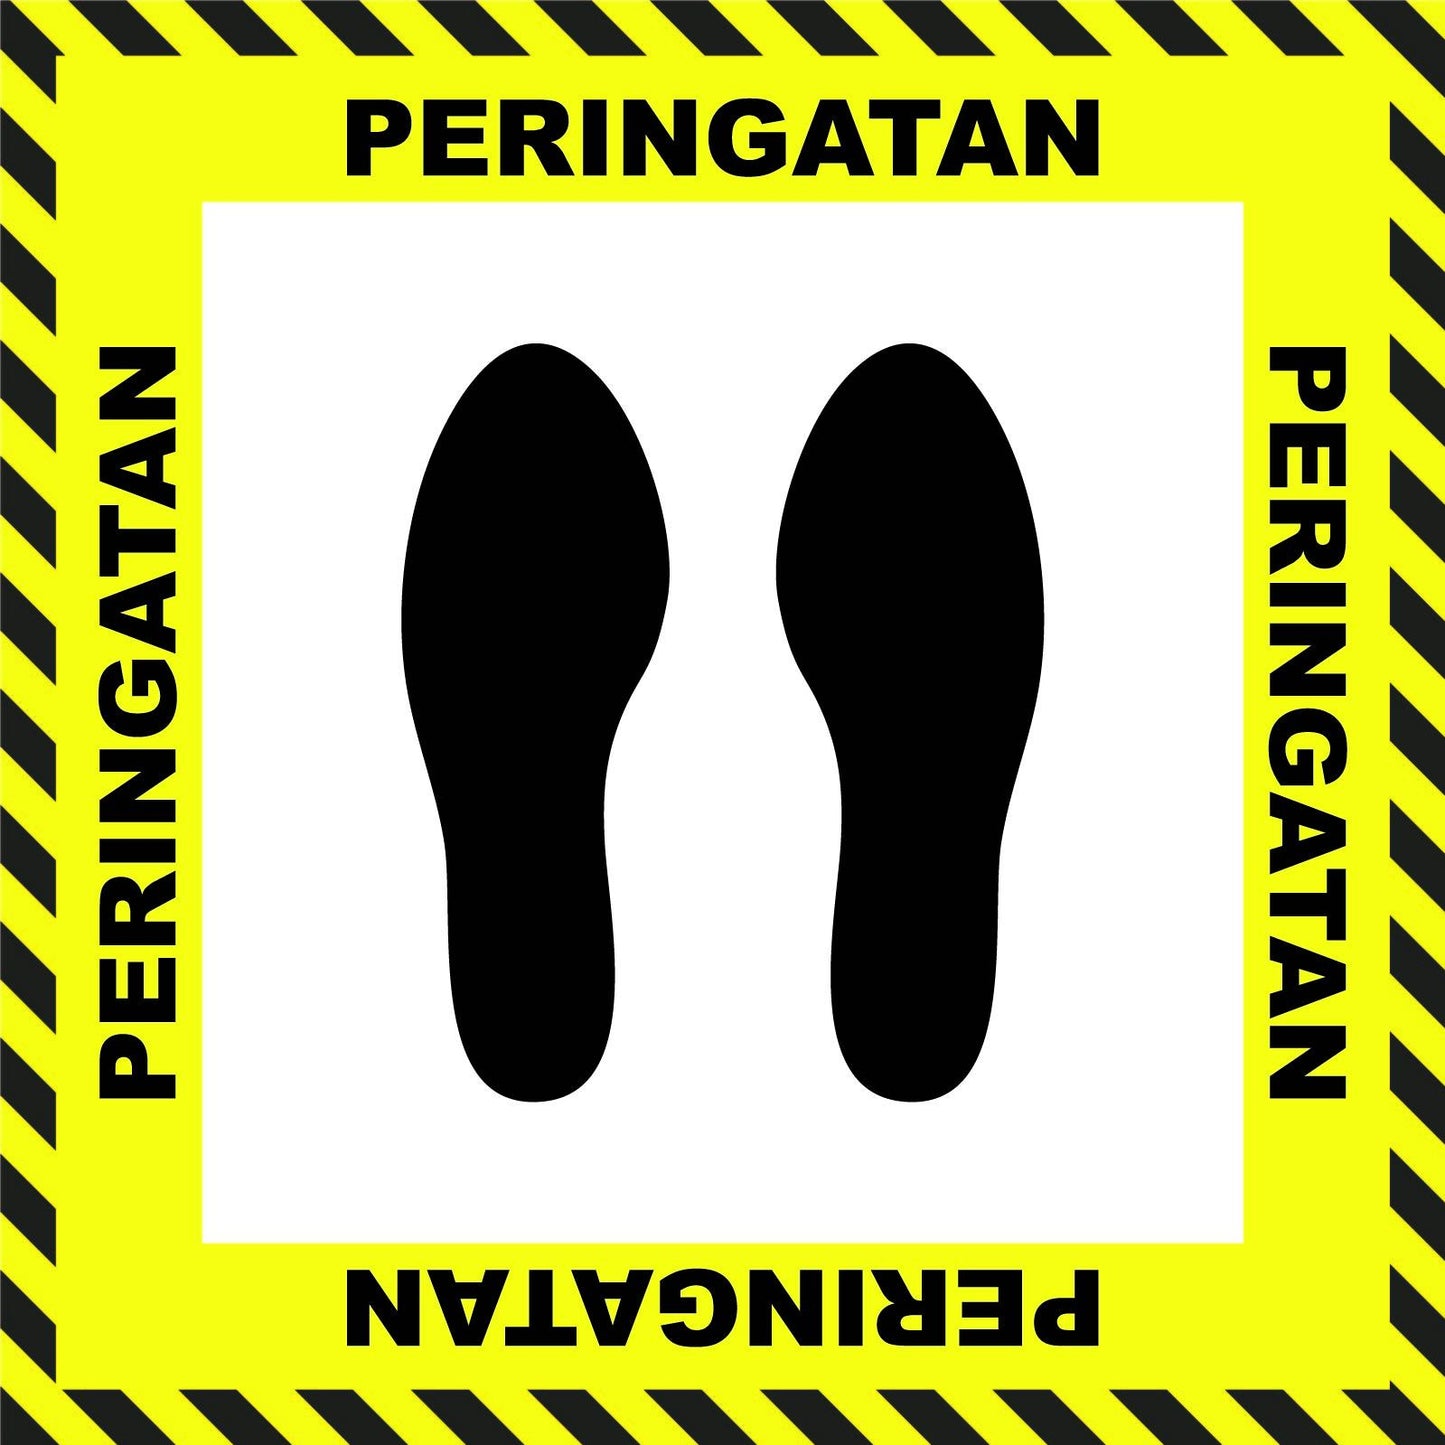 "Caution" Stand Here Social Distancing Floor Sign, Indonesian - 22"